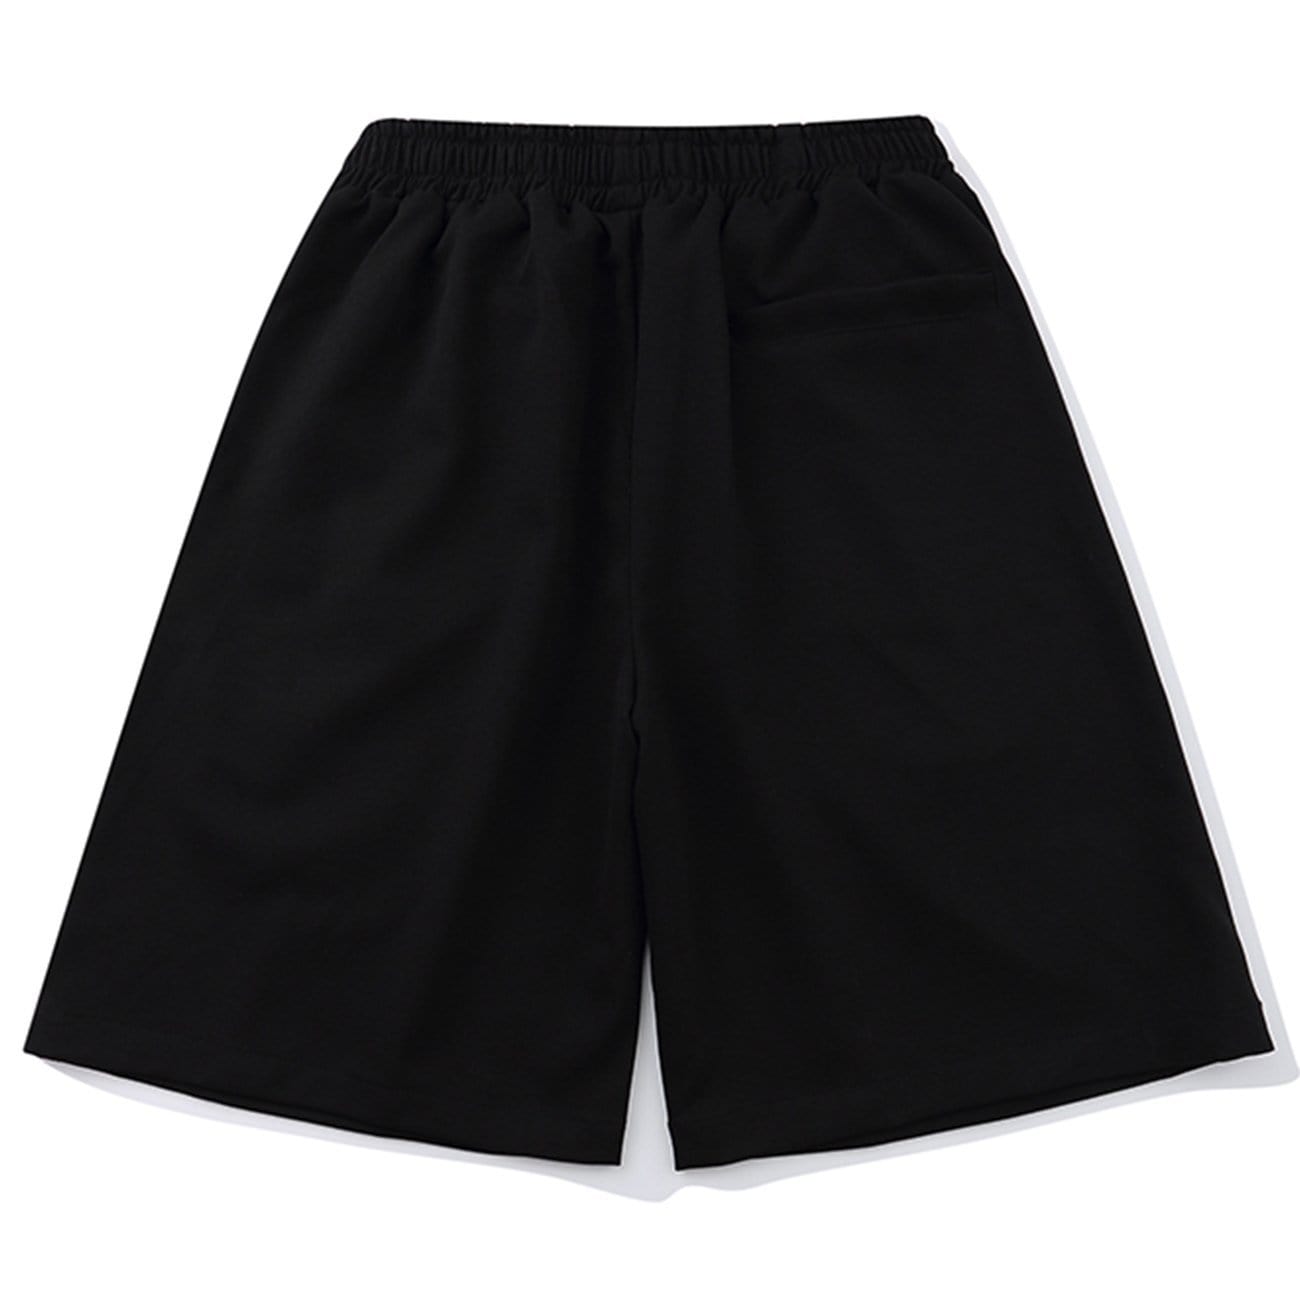 TO Functional Chain Shorts